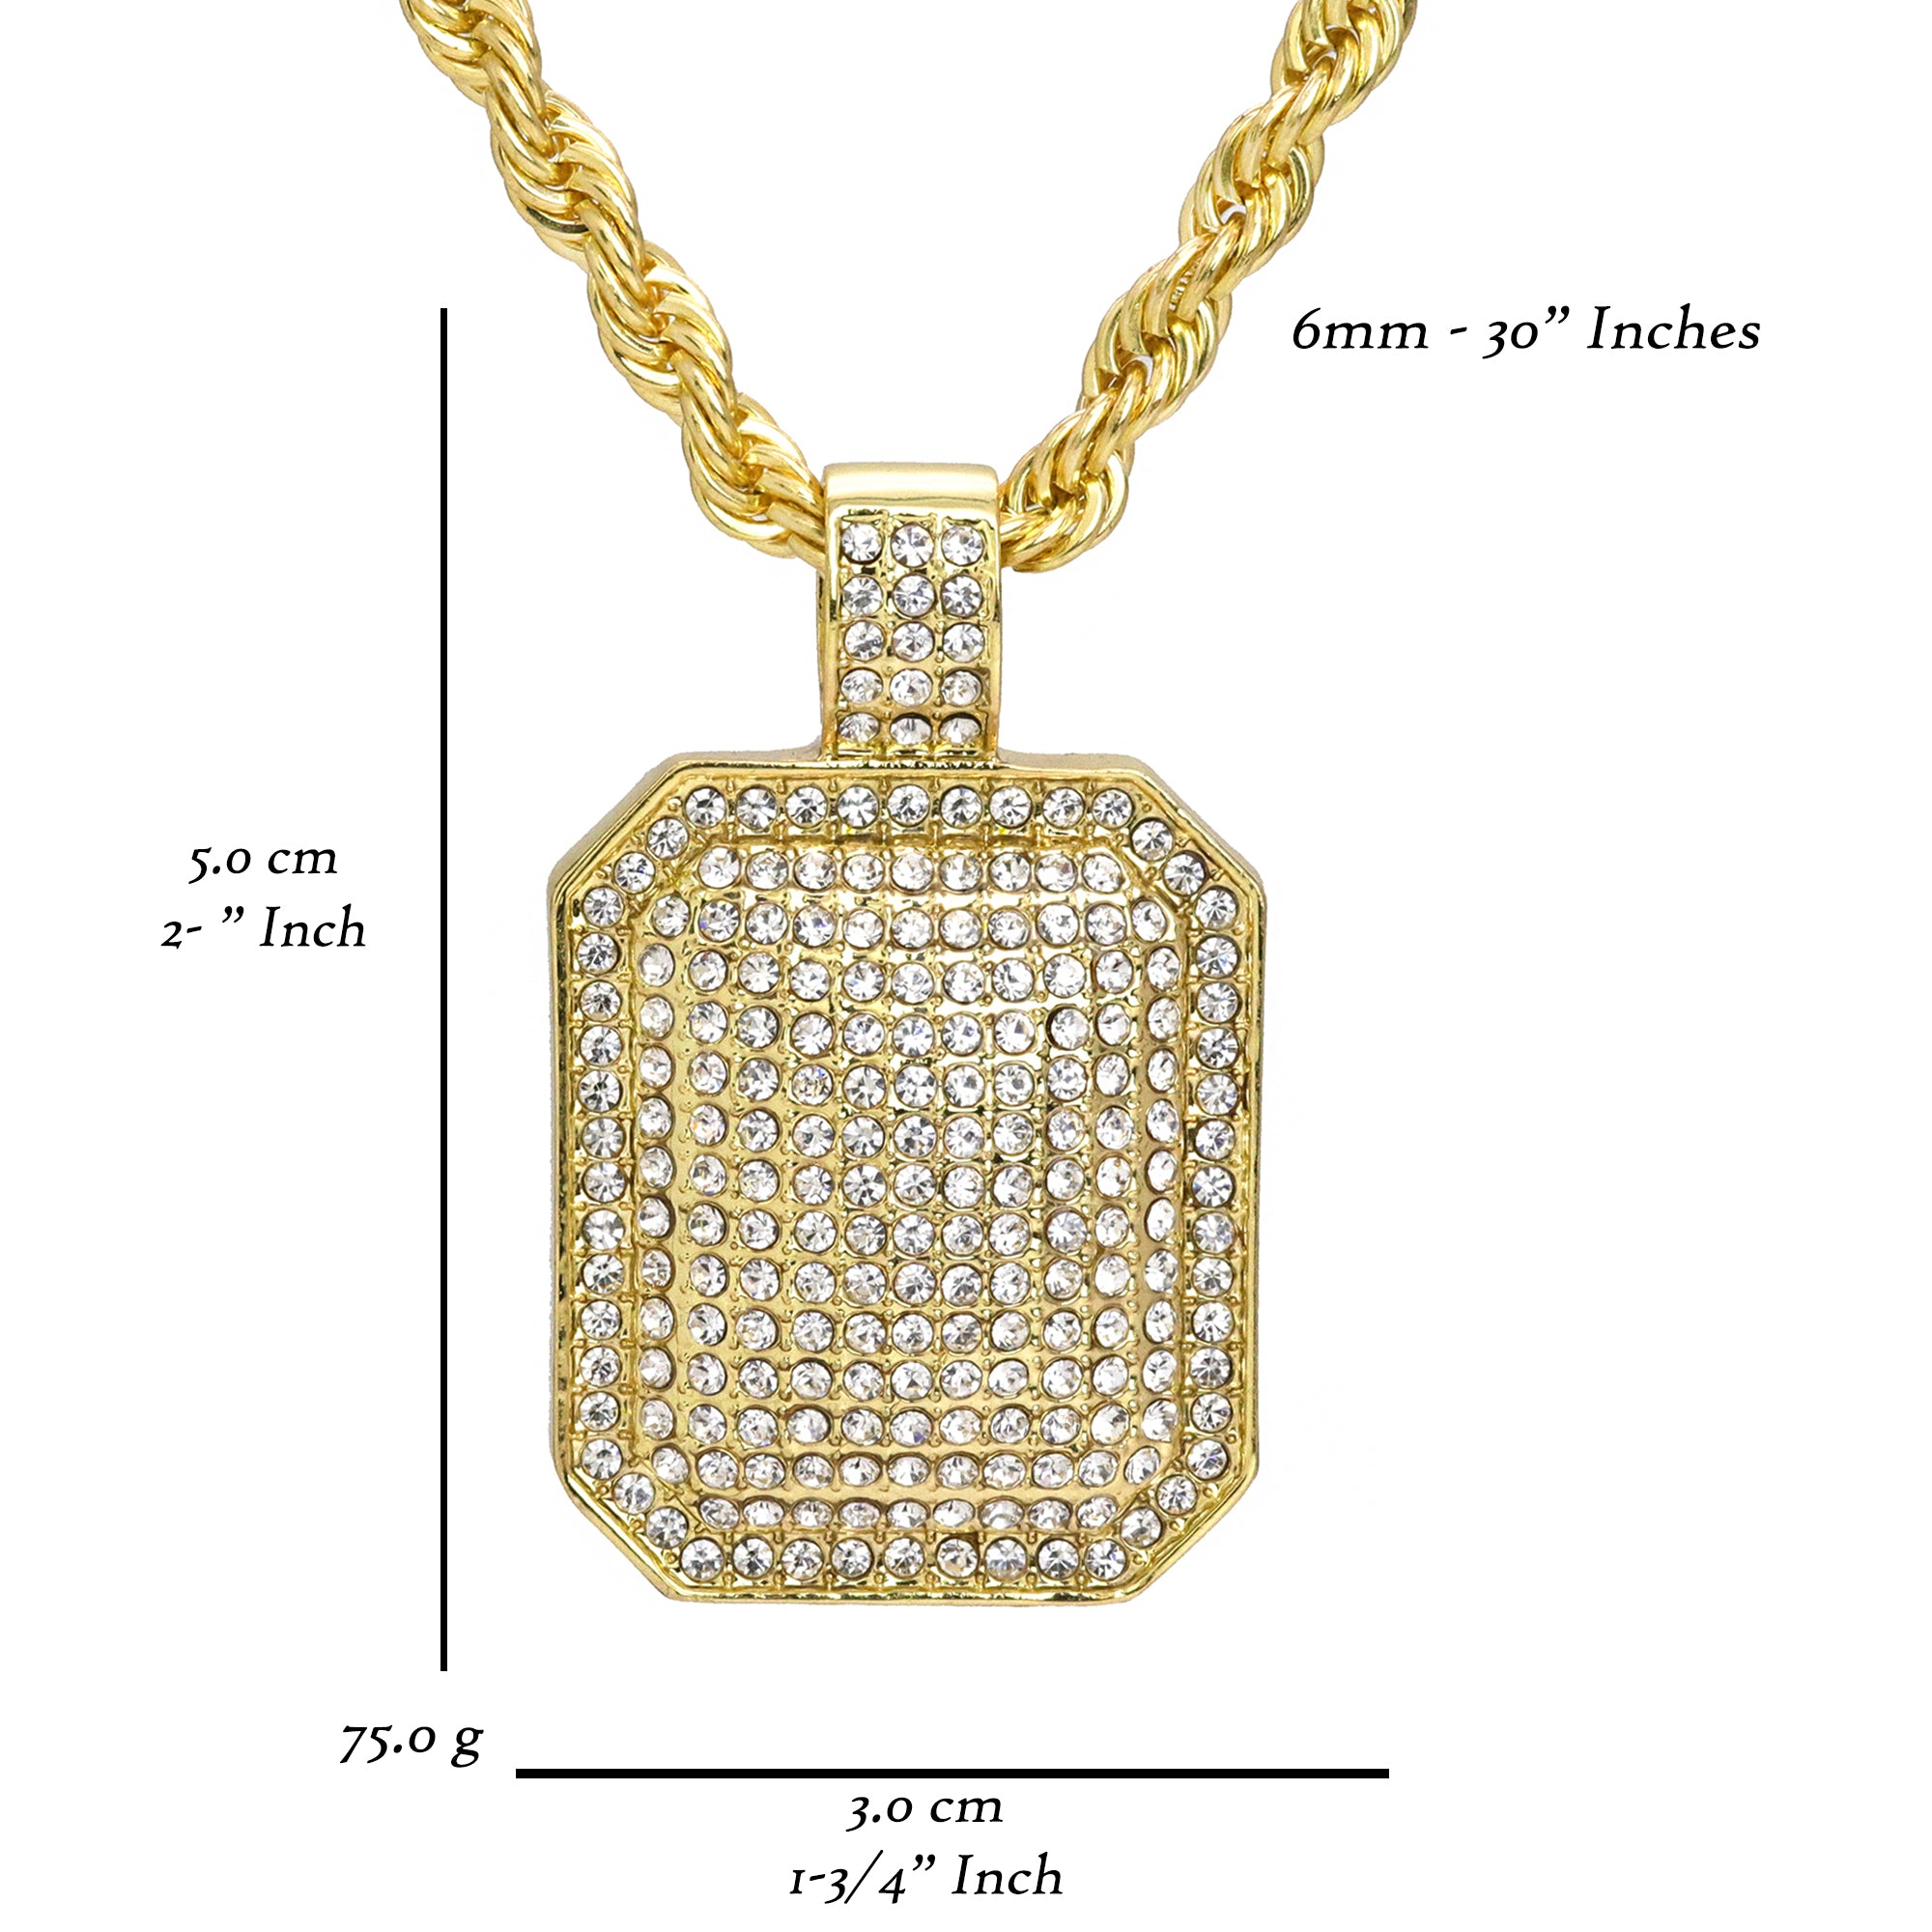 Fully Cz Dog Tag Pendant 30" Rope Chain Hip Hop Style 18k Gold Plated